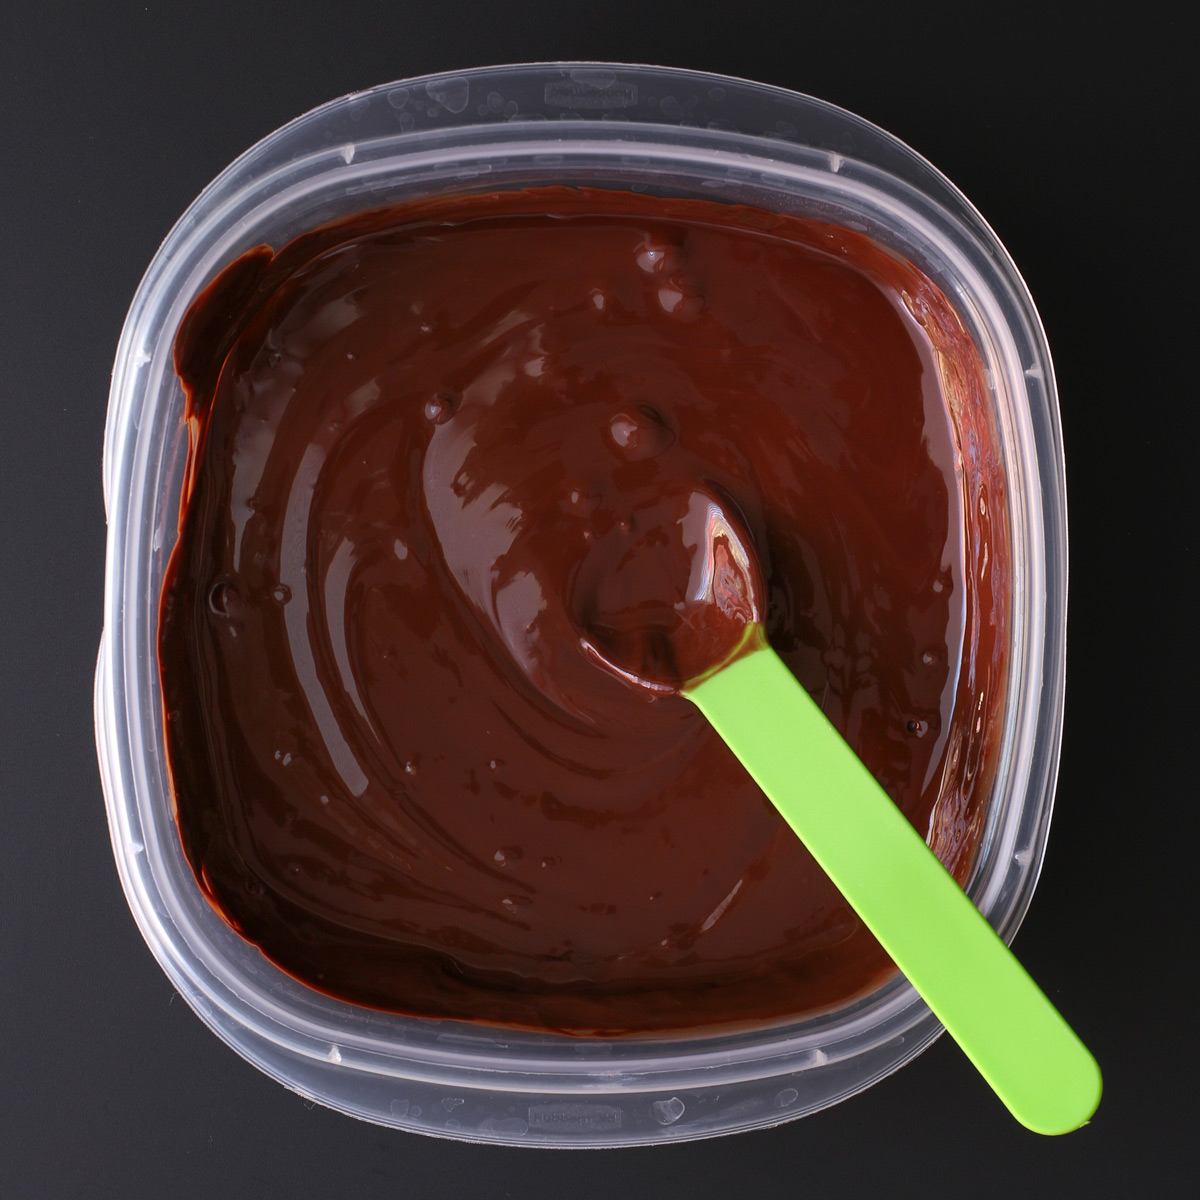 melted chocolate coating for dipping.